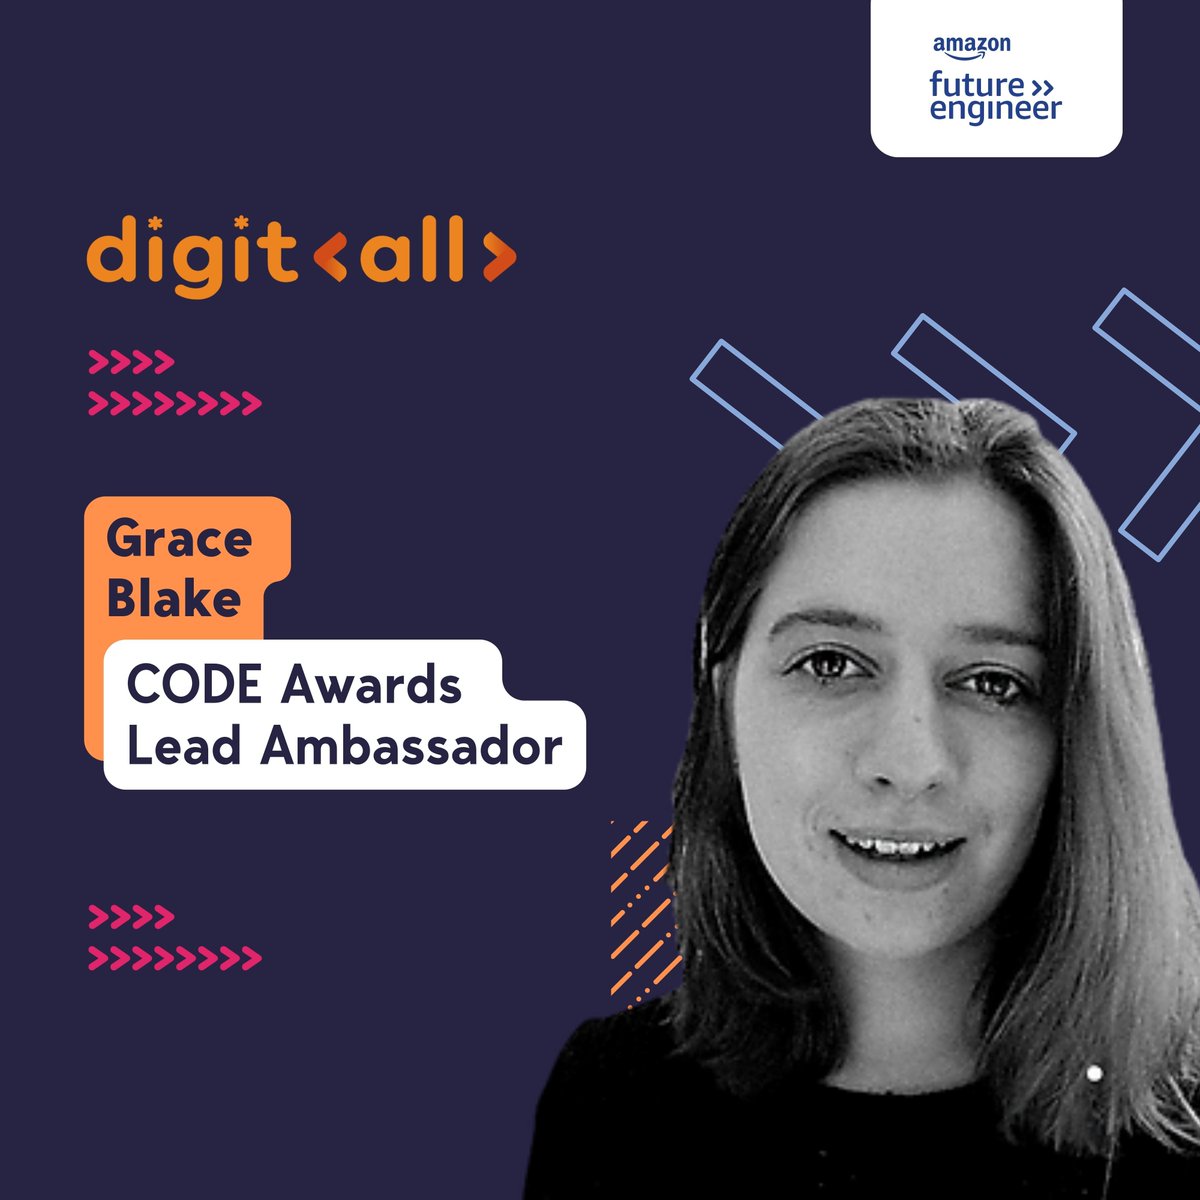 Meet Grace, one of our exceptional Ambassadors for the Code Awards! 🌟 Grace is a Data Scientist currently delivering AI and Cognitive solutions to the U.K. Financial Services Sector at IBM. Learn more about our Code Awards at digitall.charity/codeawards 🏆